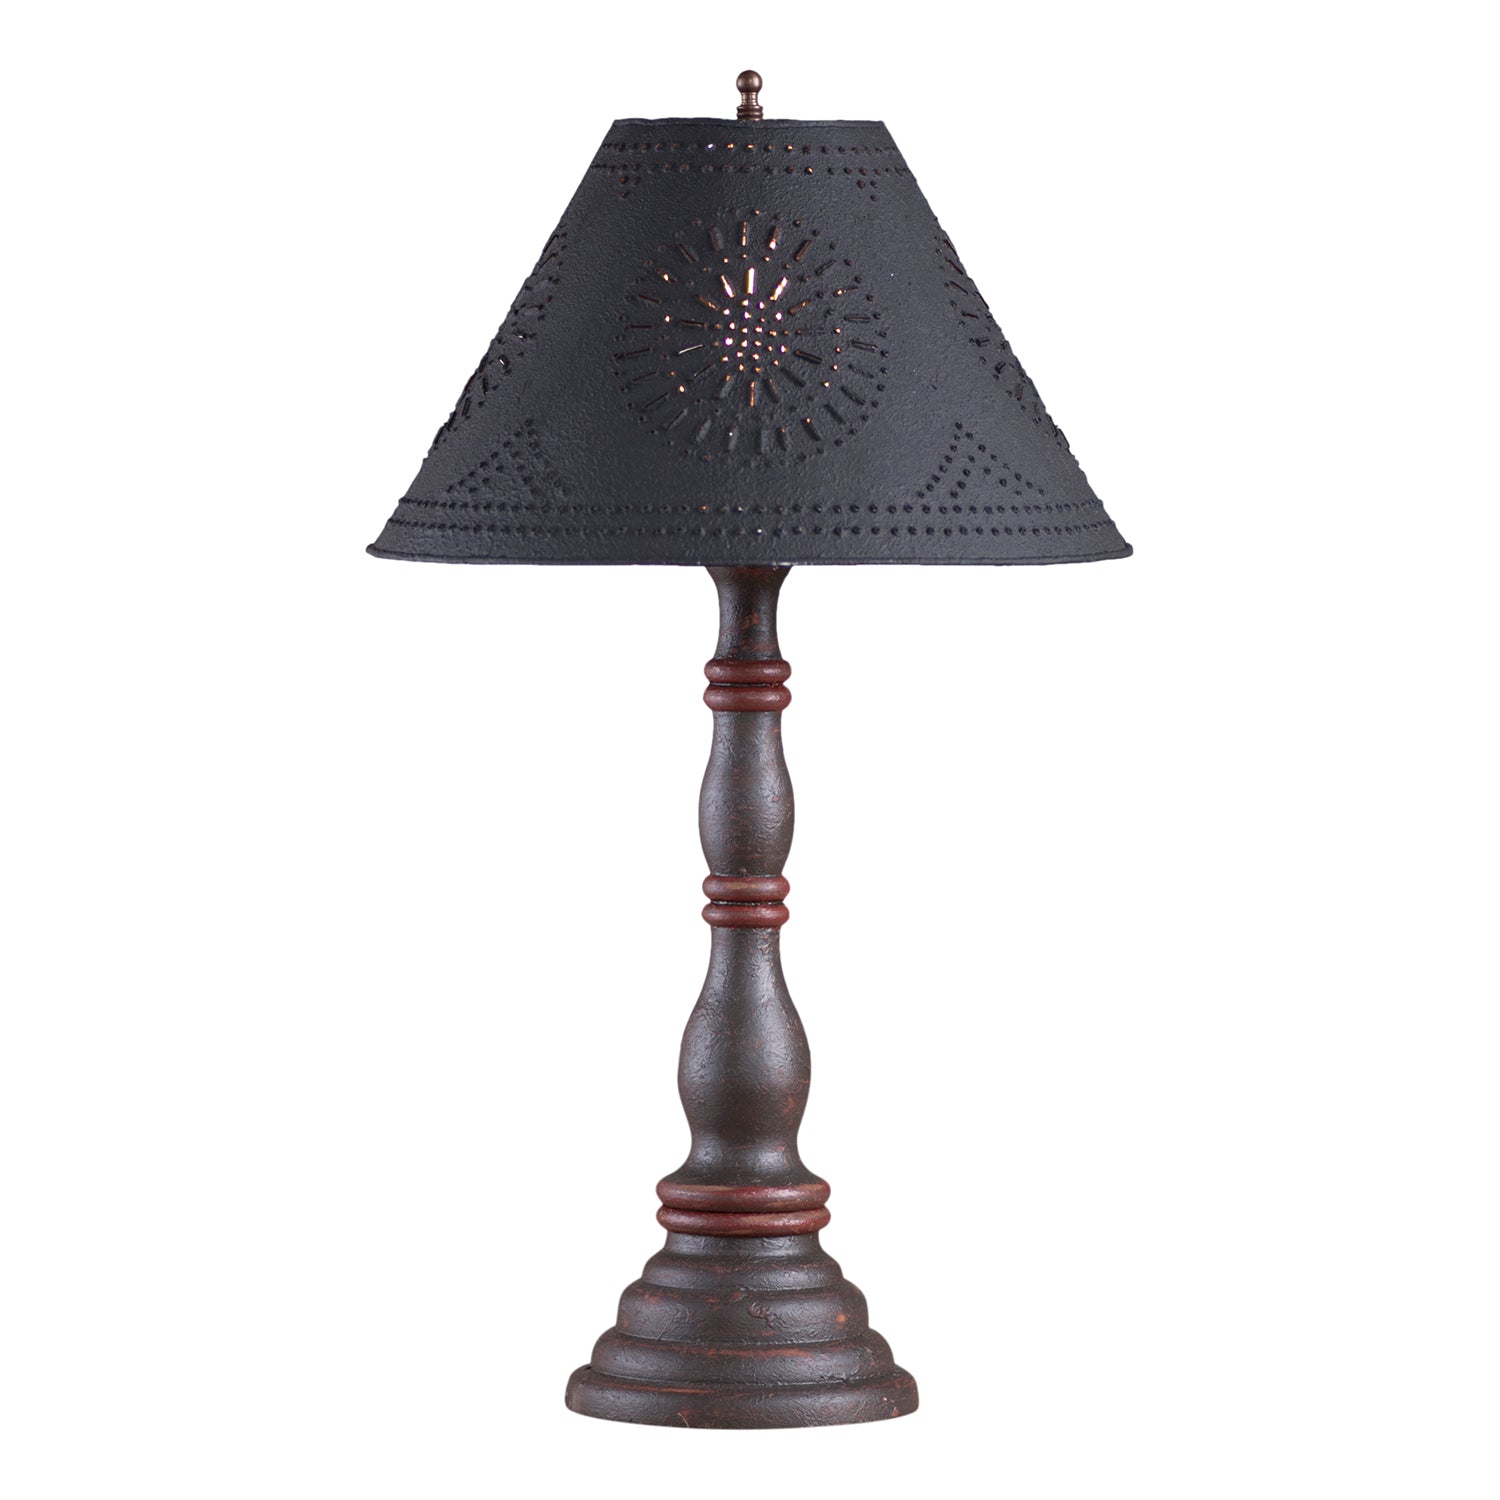 Davenport Lamp in Americana Espresso with Textured Black Tin Shade